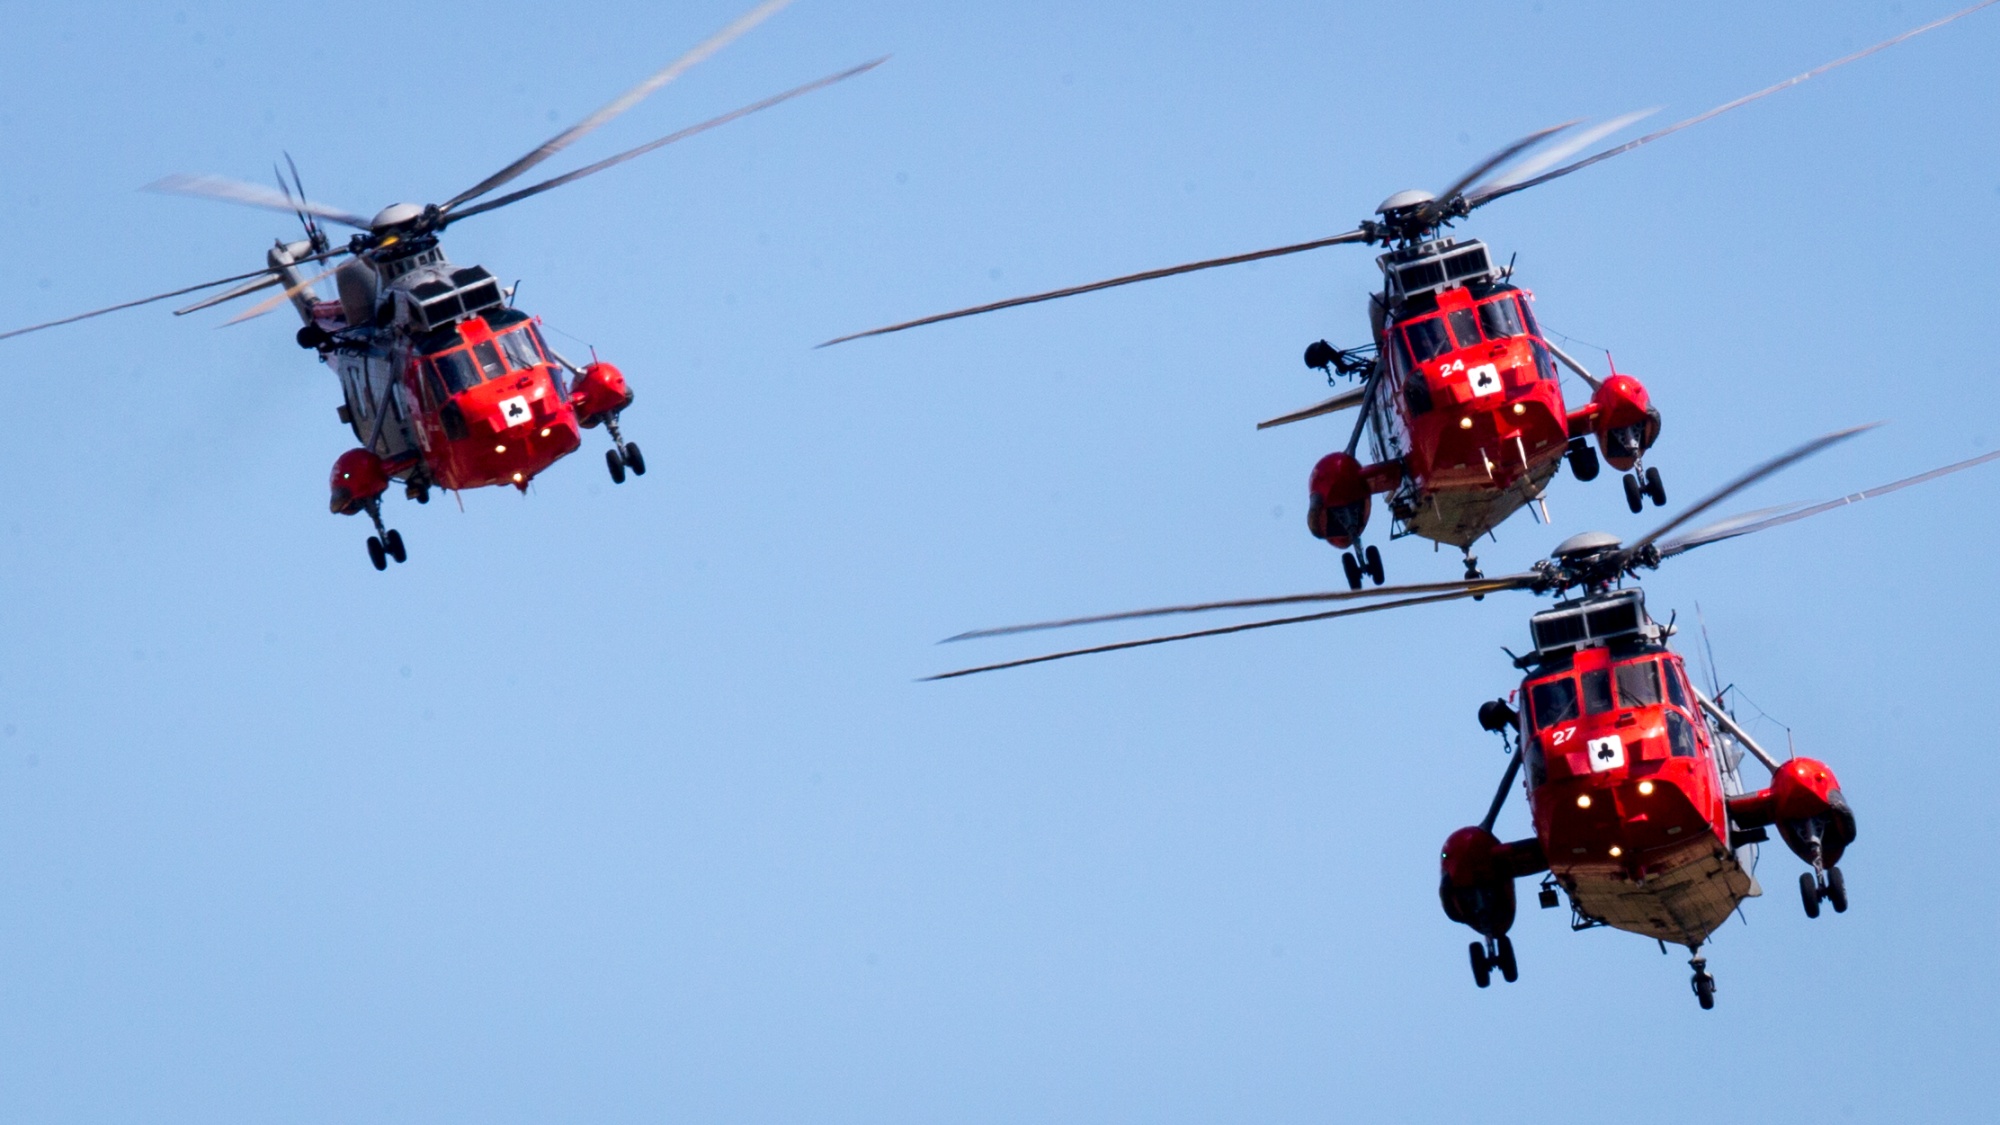 RAF Sea King helicopters.